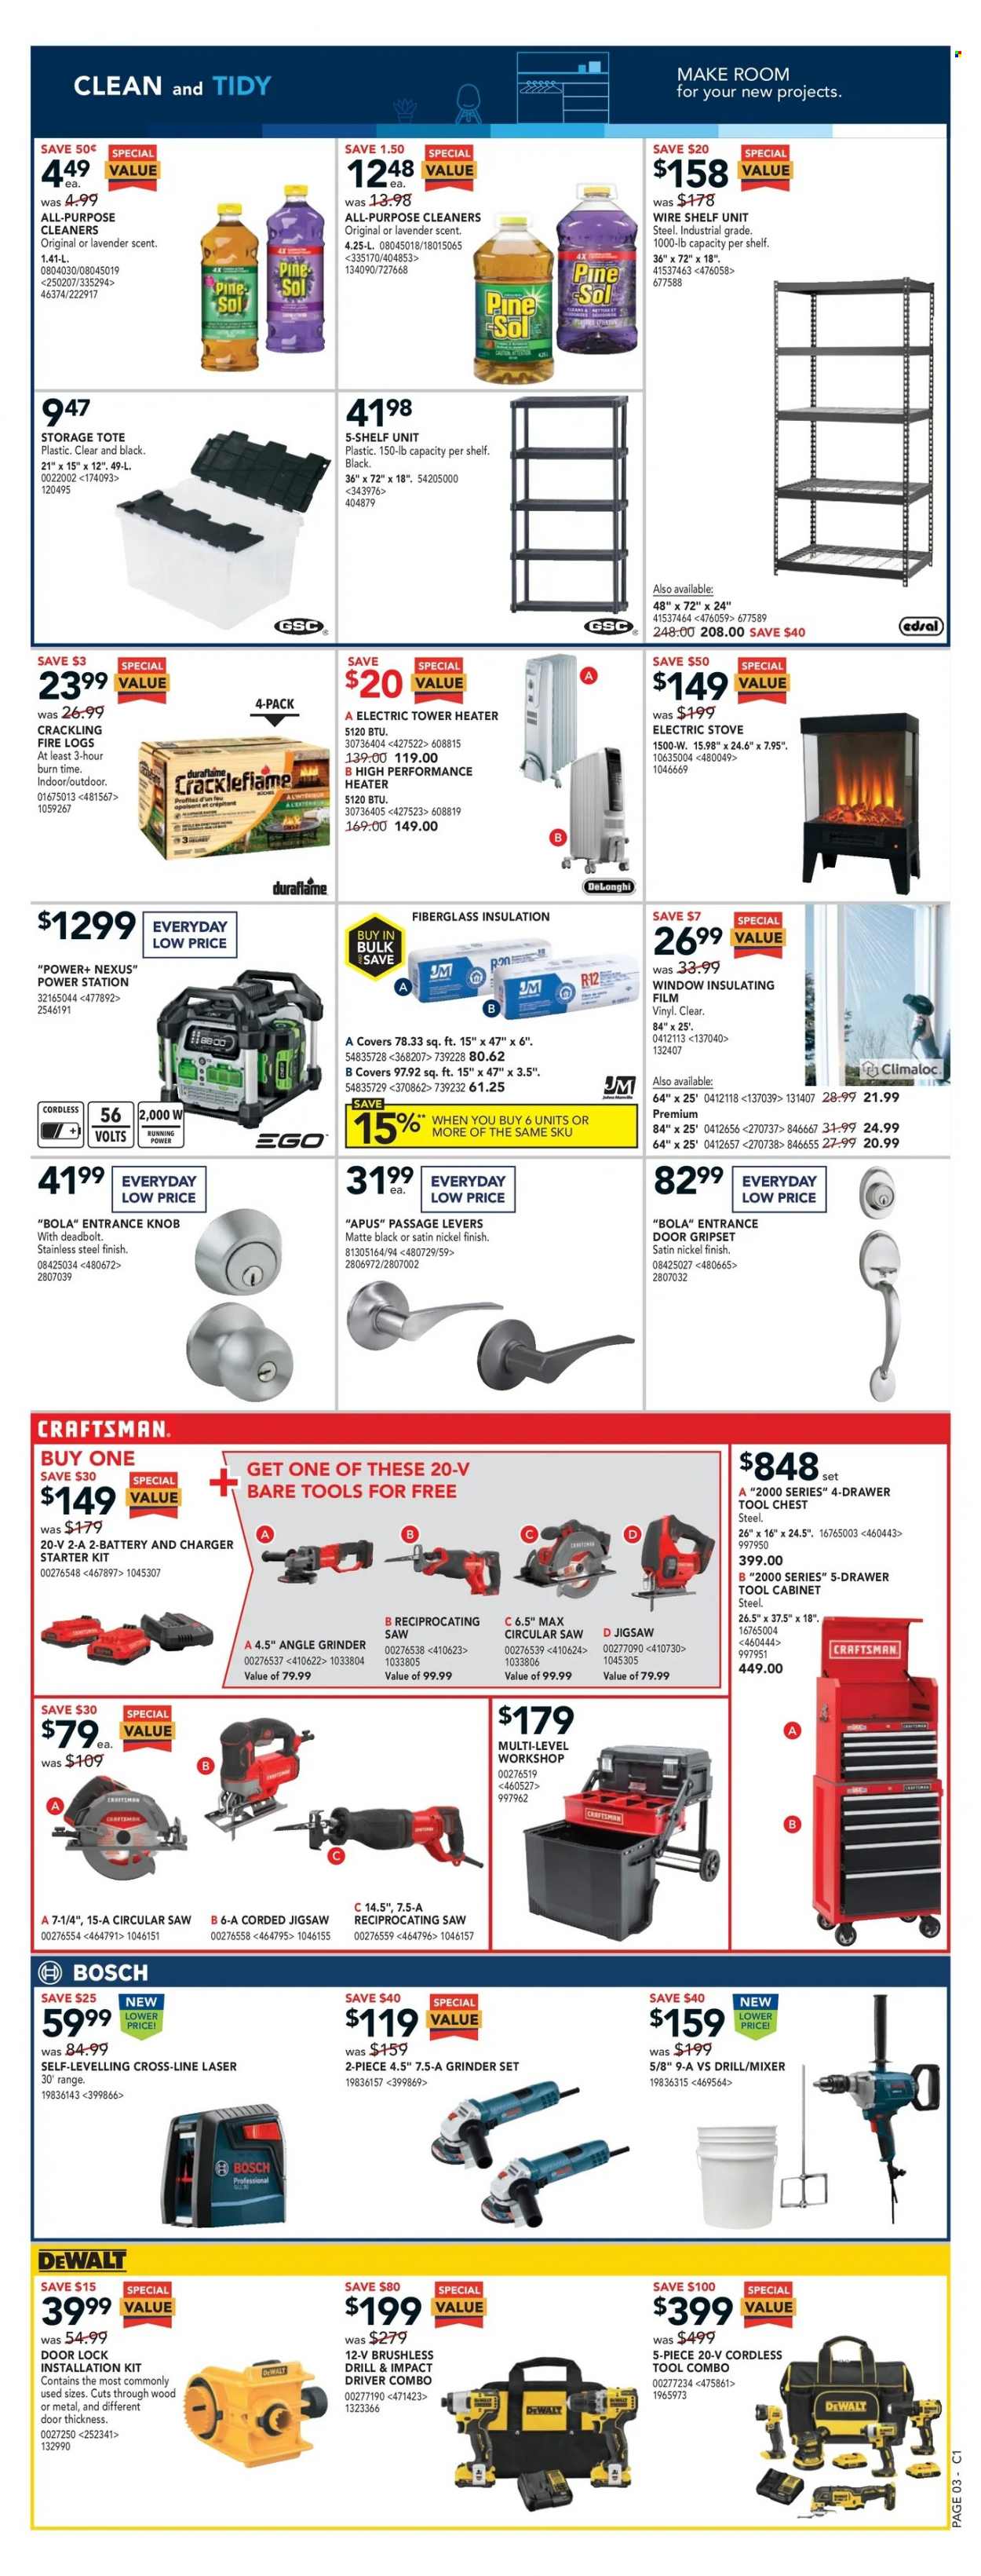 thumbnail - RONA Flyer - January 20, 2022 - January 26, 2022 - Sales products - stove, electric stove, De'Longhi, mixer, grinder, cabinet, shelf unit, heater, fiberglass insulation, DeWALT, impact driver, circular saw, saw, angle grinder, reciprocating saw, tool chest, tool cabinets, storage tote. Page 4.